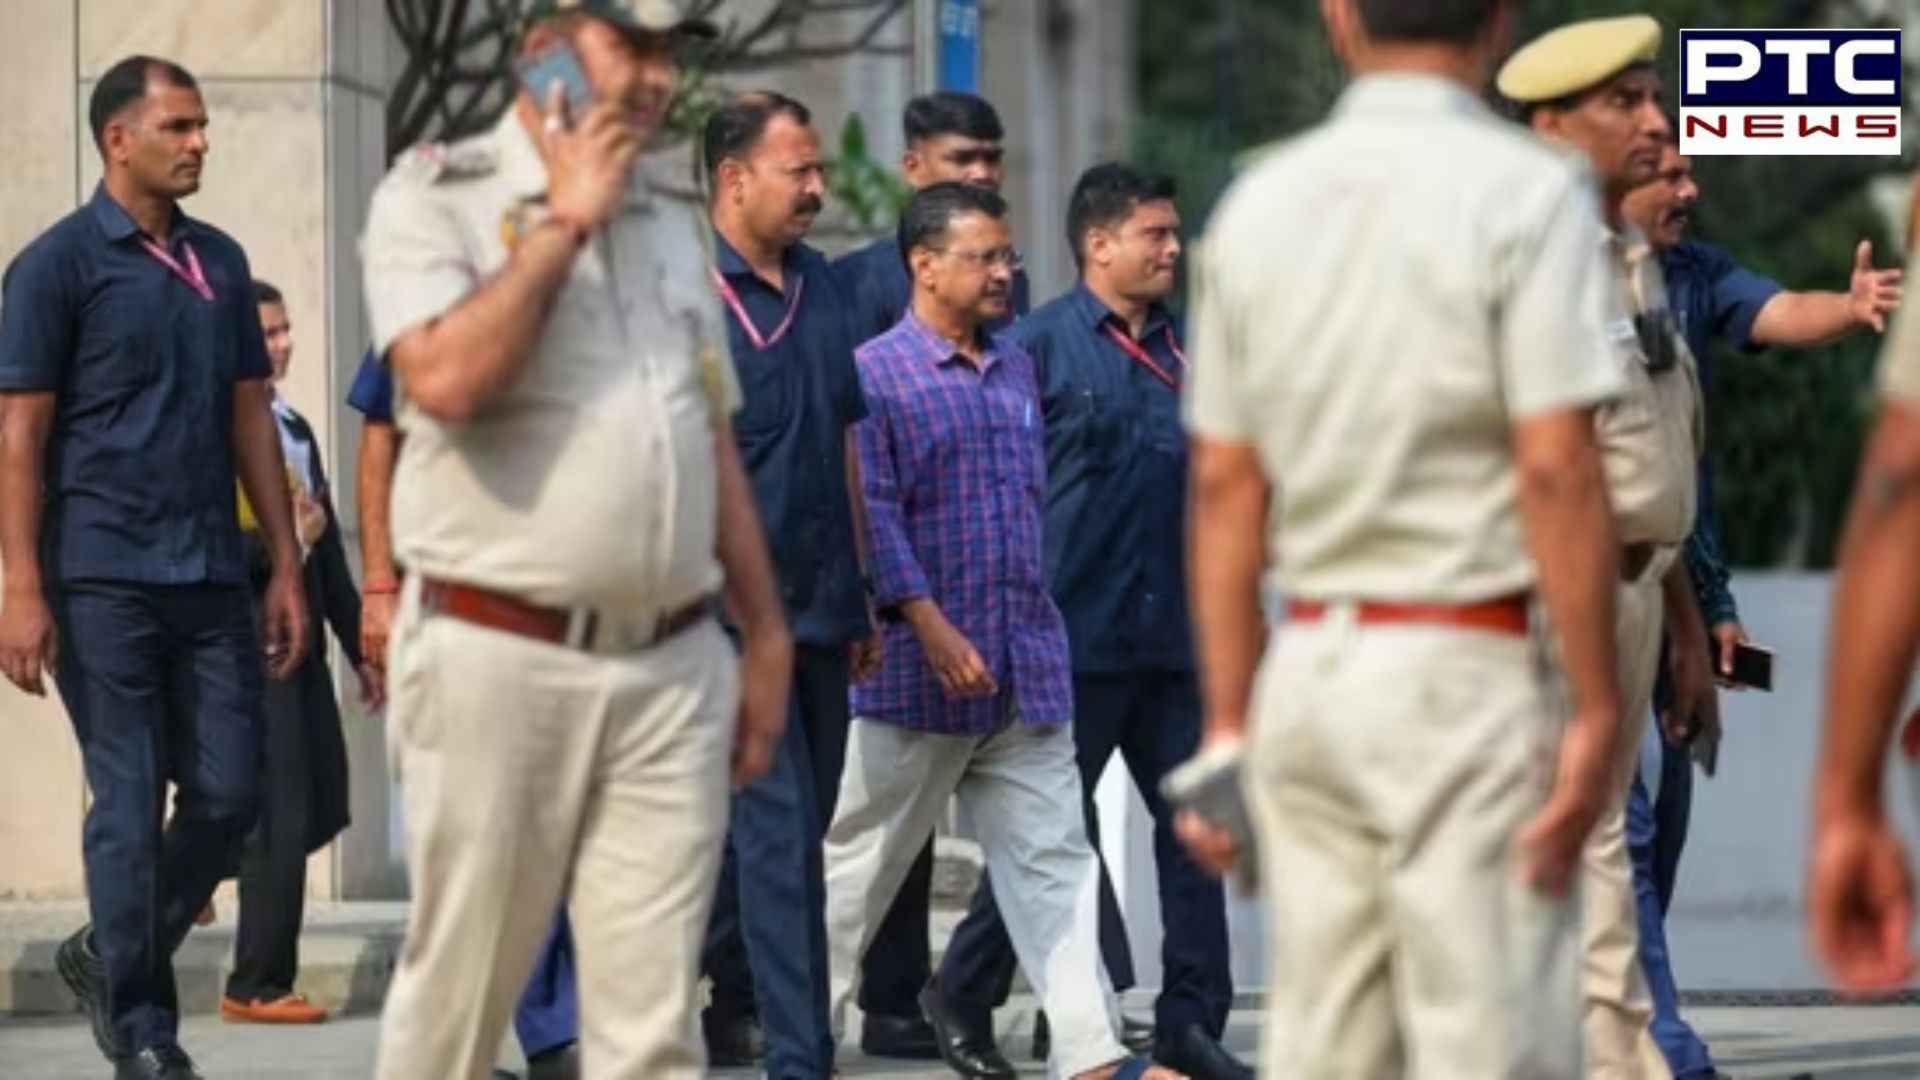 Delhi excise policy case: High Court rejects plea seeking removal of Arvind Kejriwal as CM